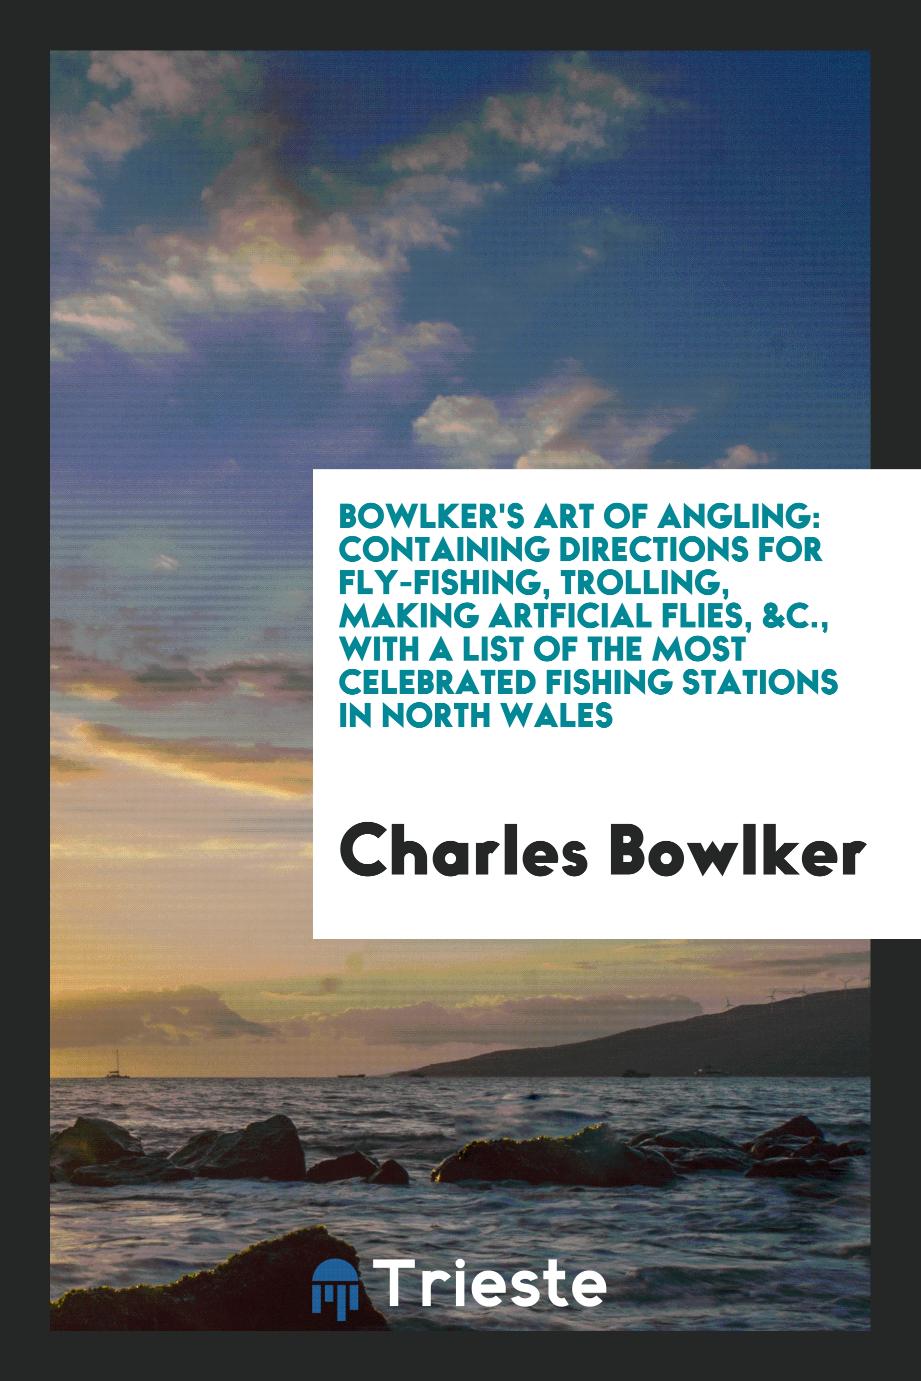 Bowlker's Art of Angling: Containing Directions for Fly-Fishing, Trolling, Making Artficial Flies, &C., with a List of the Most Celebrated Fishing Stations in North Wales